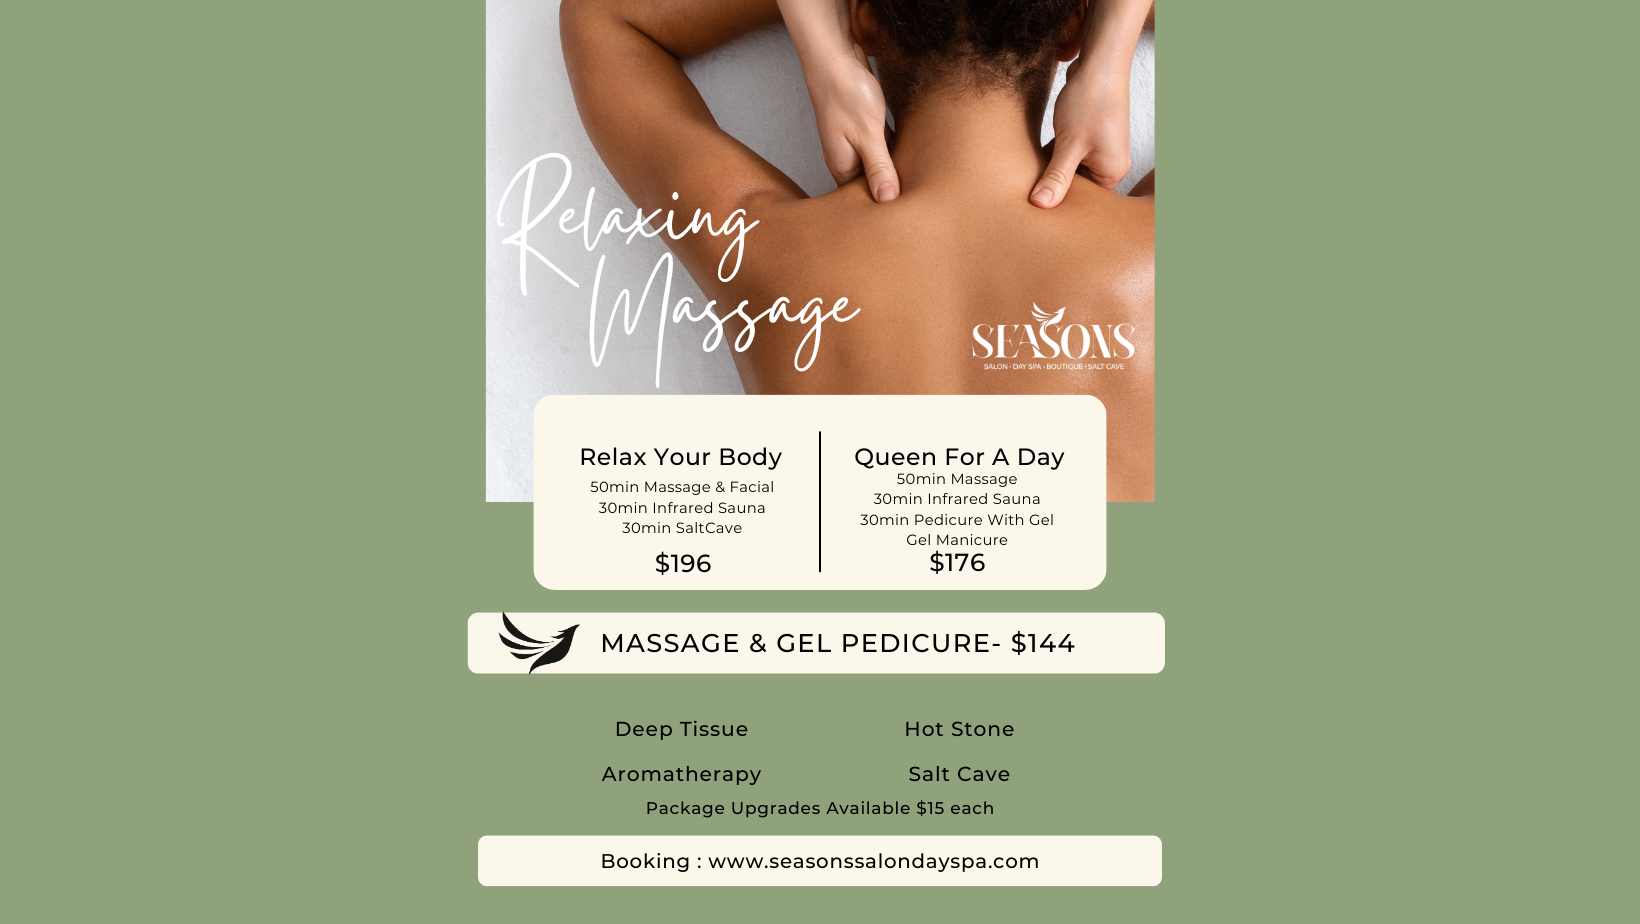 Green Simple Relaxing Massage Poster (Facebook Cover)